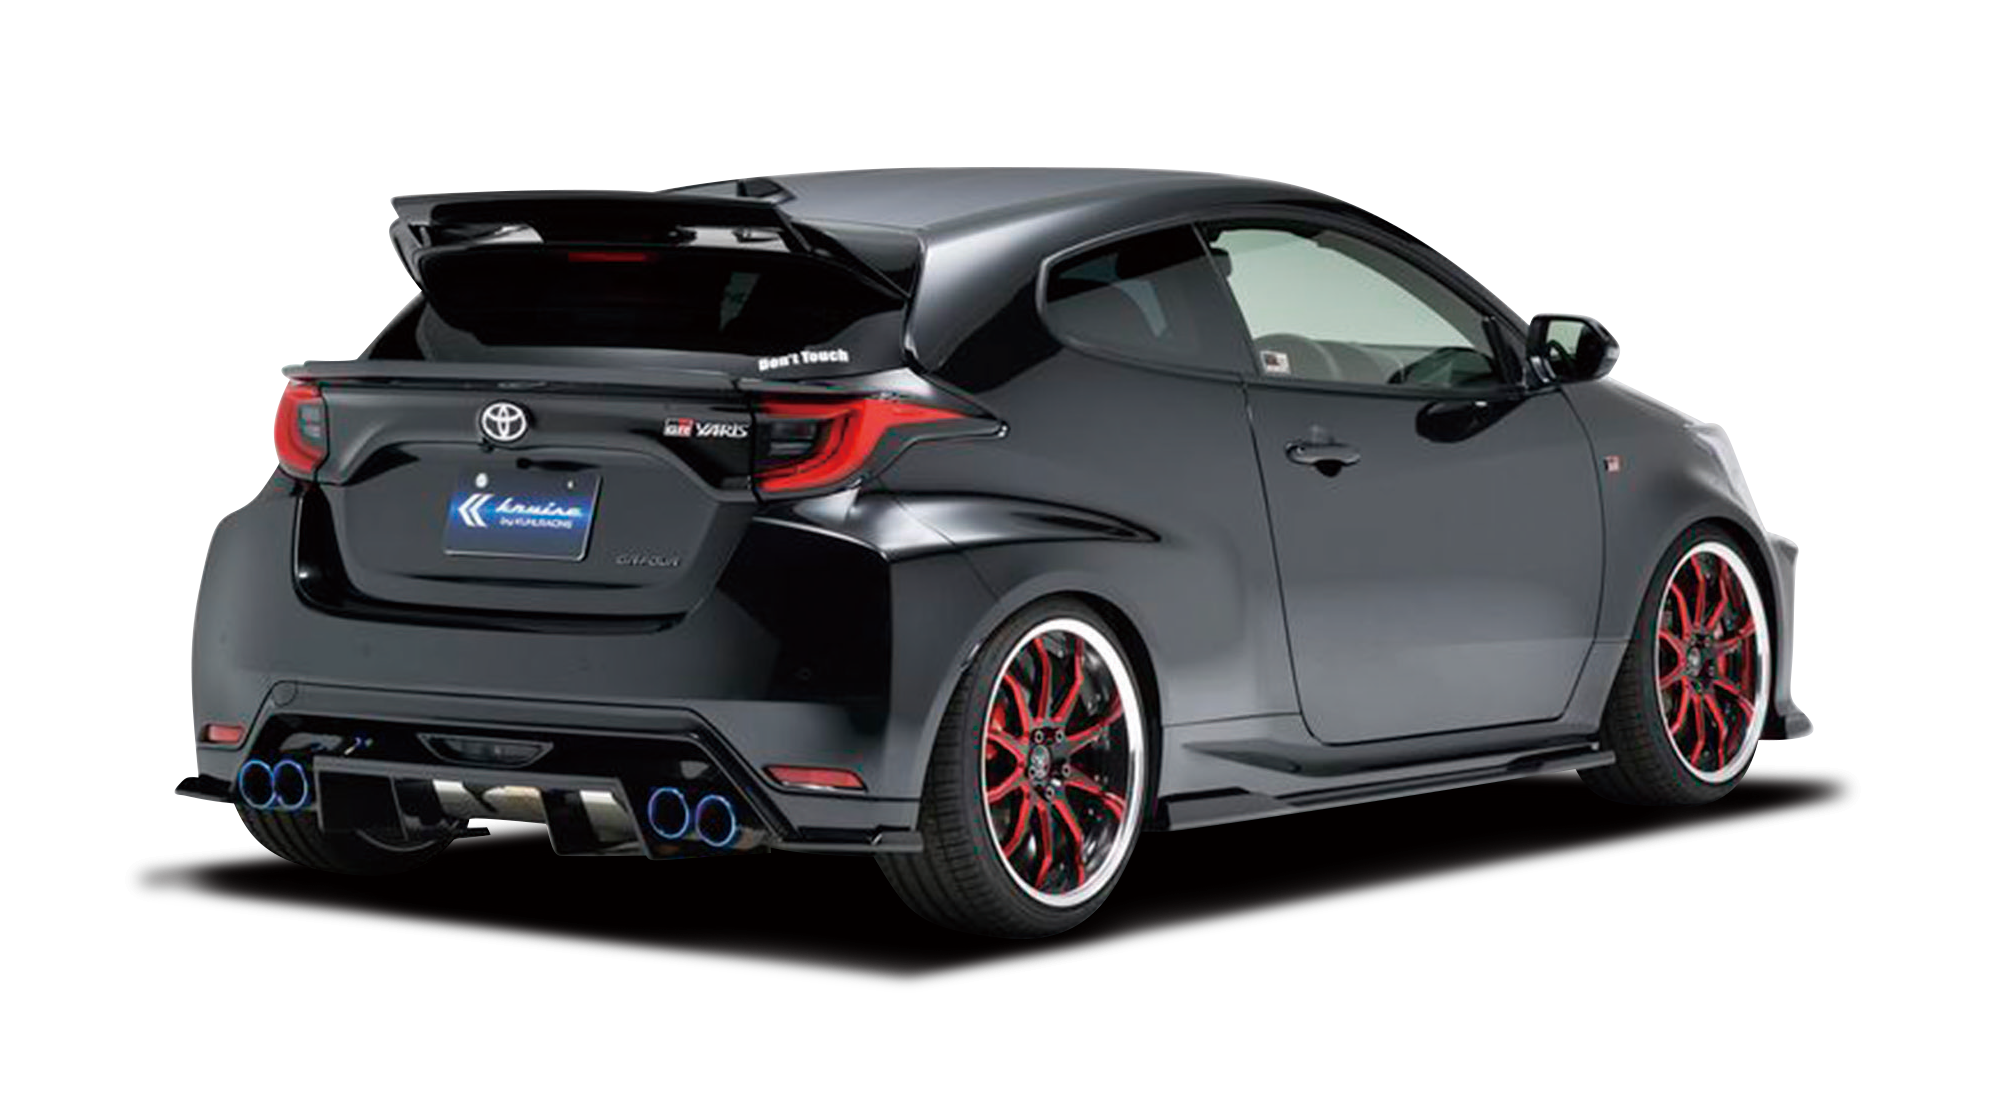 KUHL RACING KRUISE KR-GRYRR REAR SIDE DIFFUSER FRP UNPAINTED FOR TOYOTA GR YARIS GXPA16 KUHL-00020